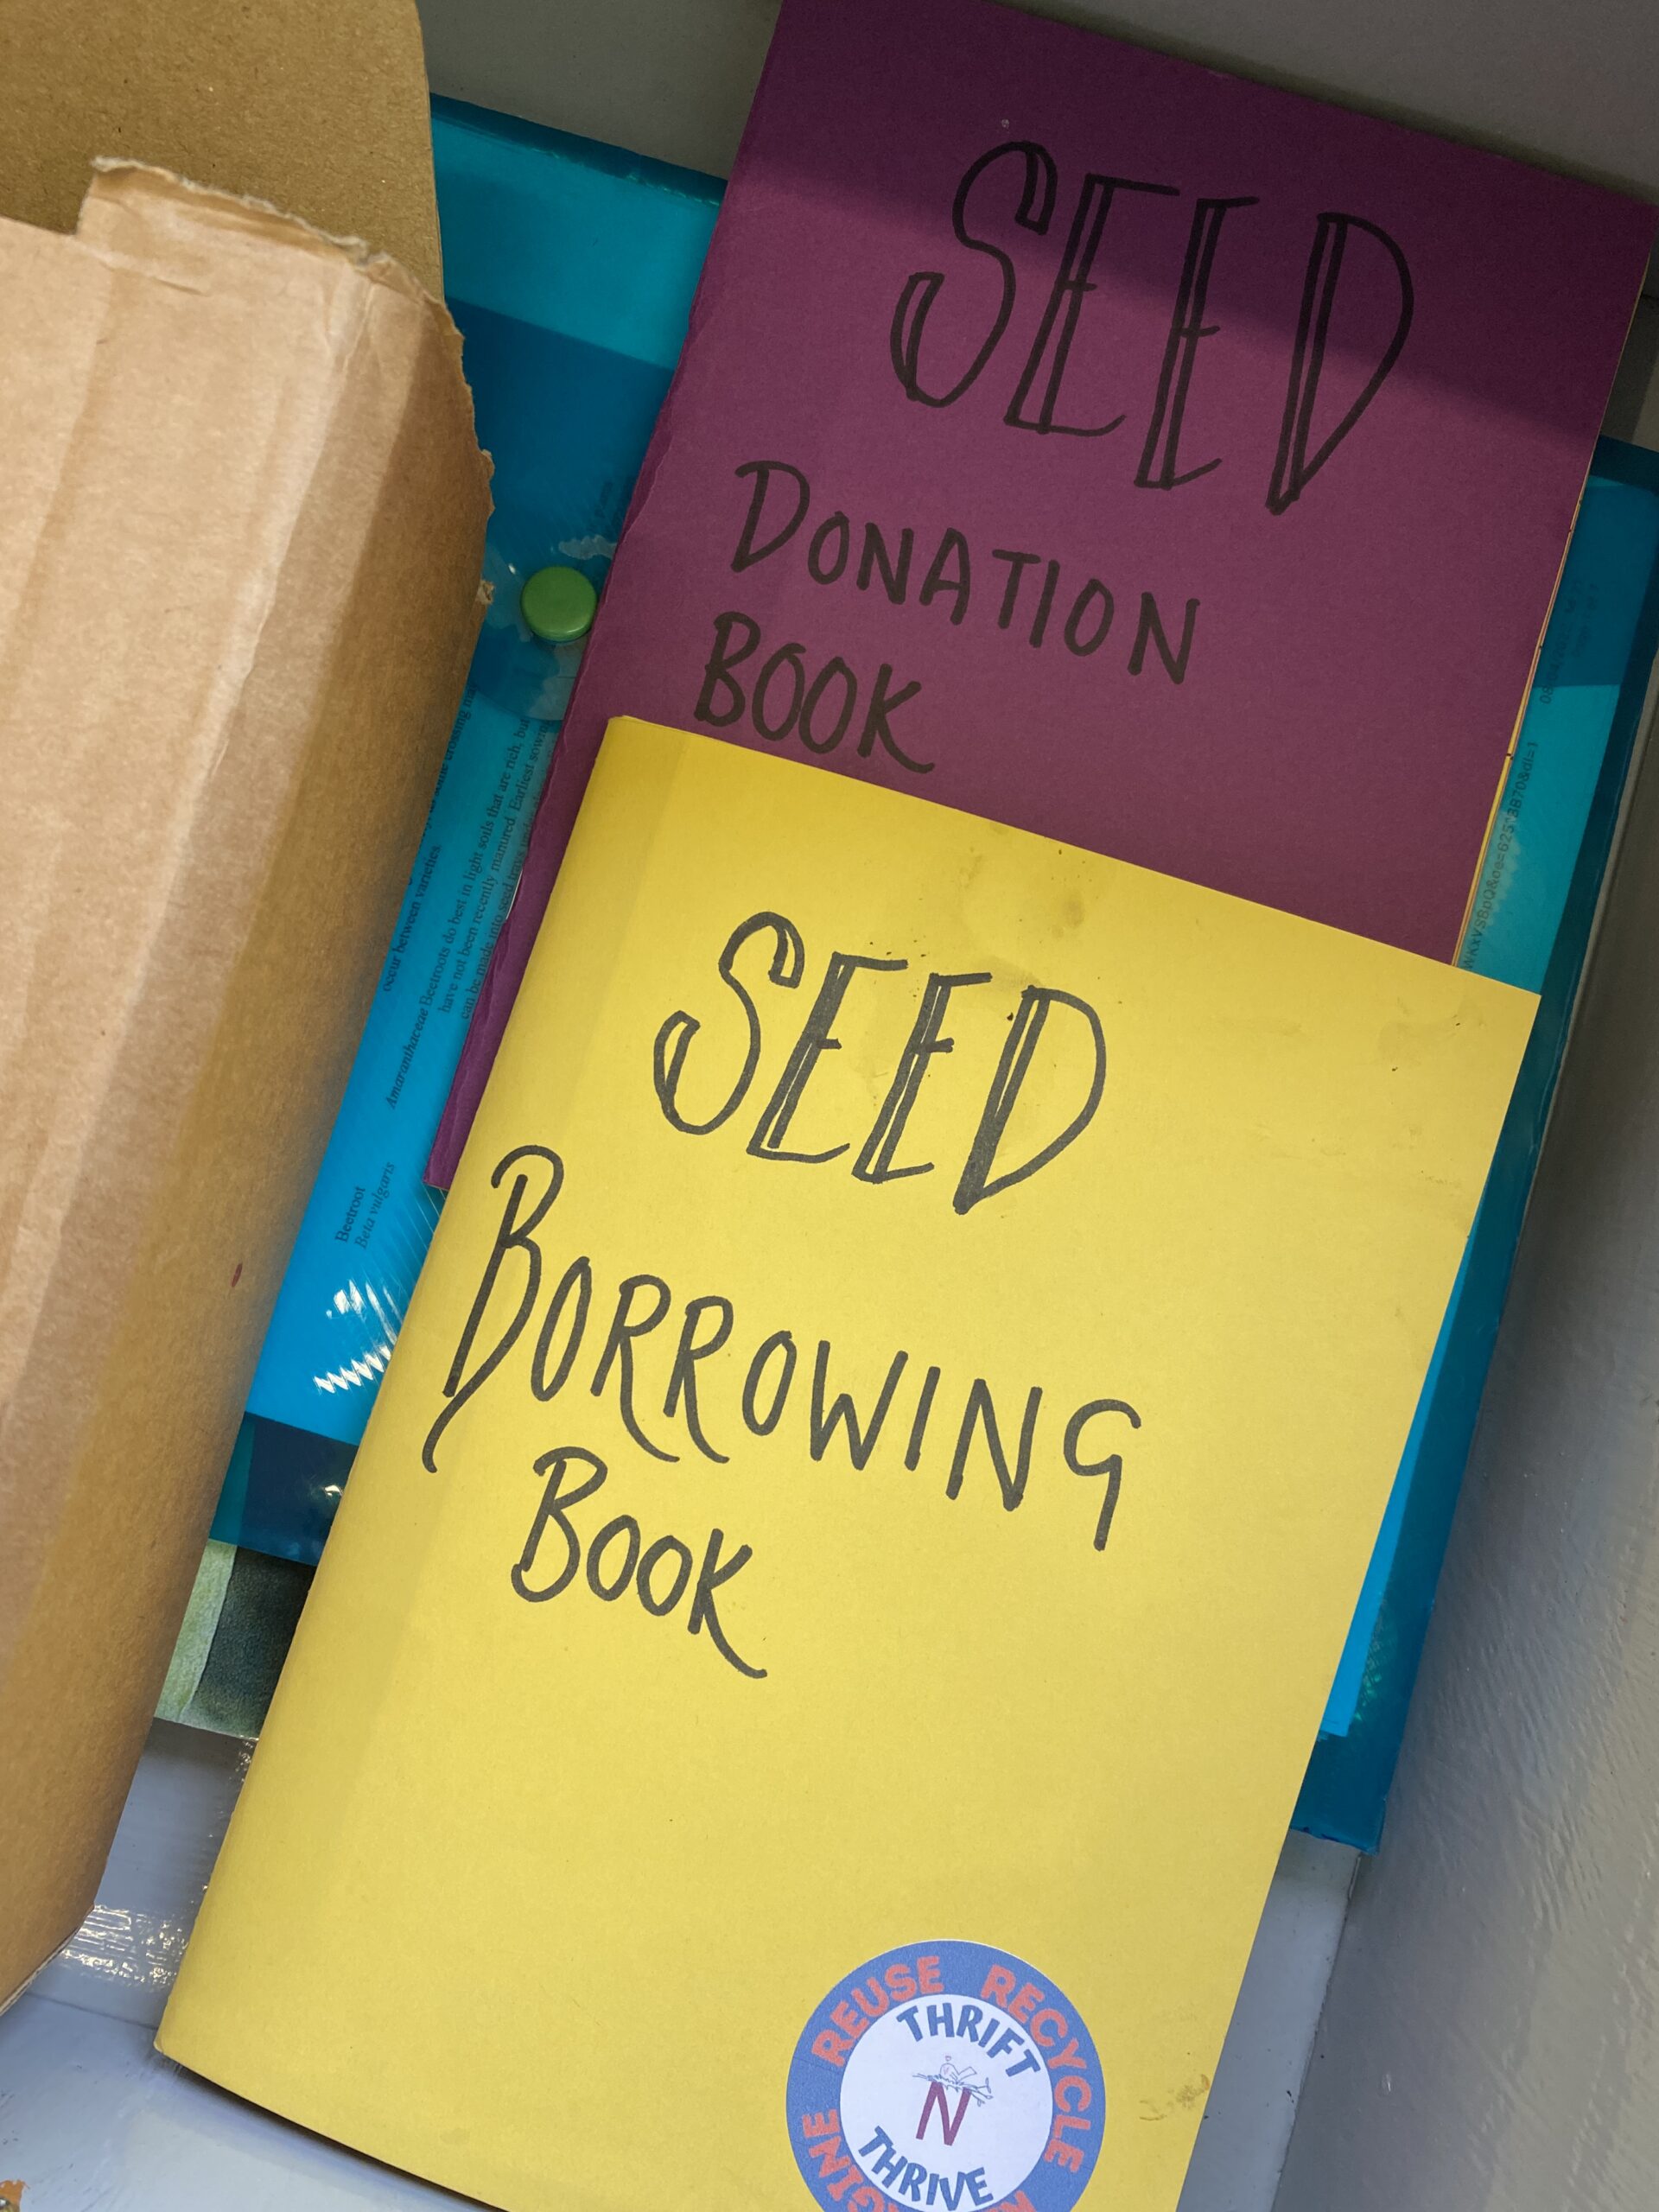 Kirriemuir Seed Library Donations and Borrowing Books